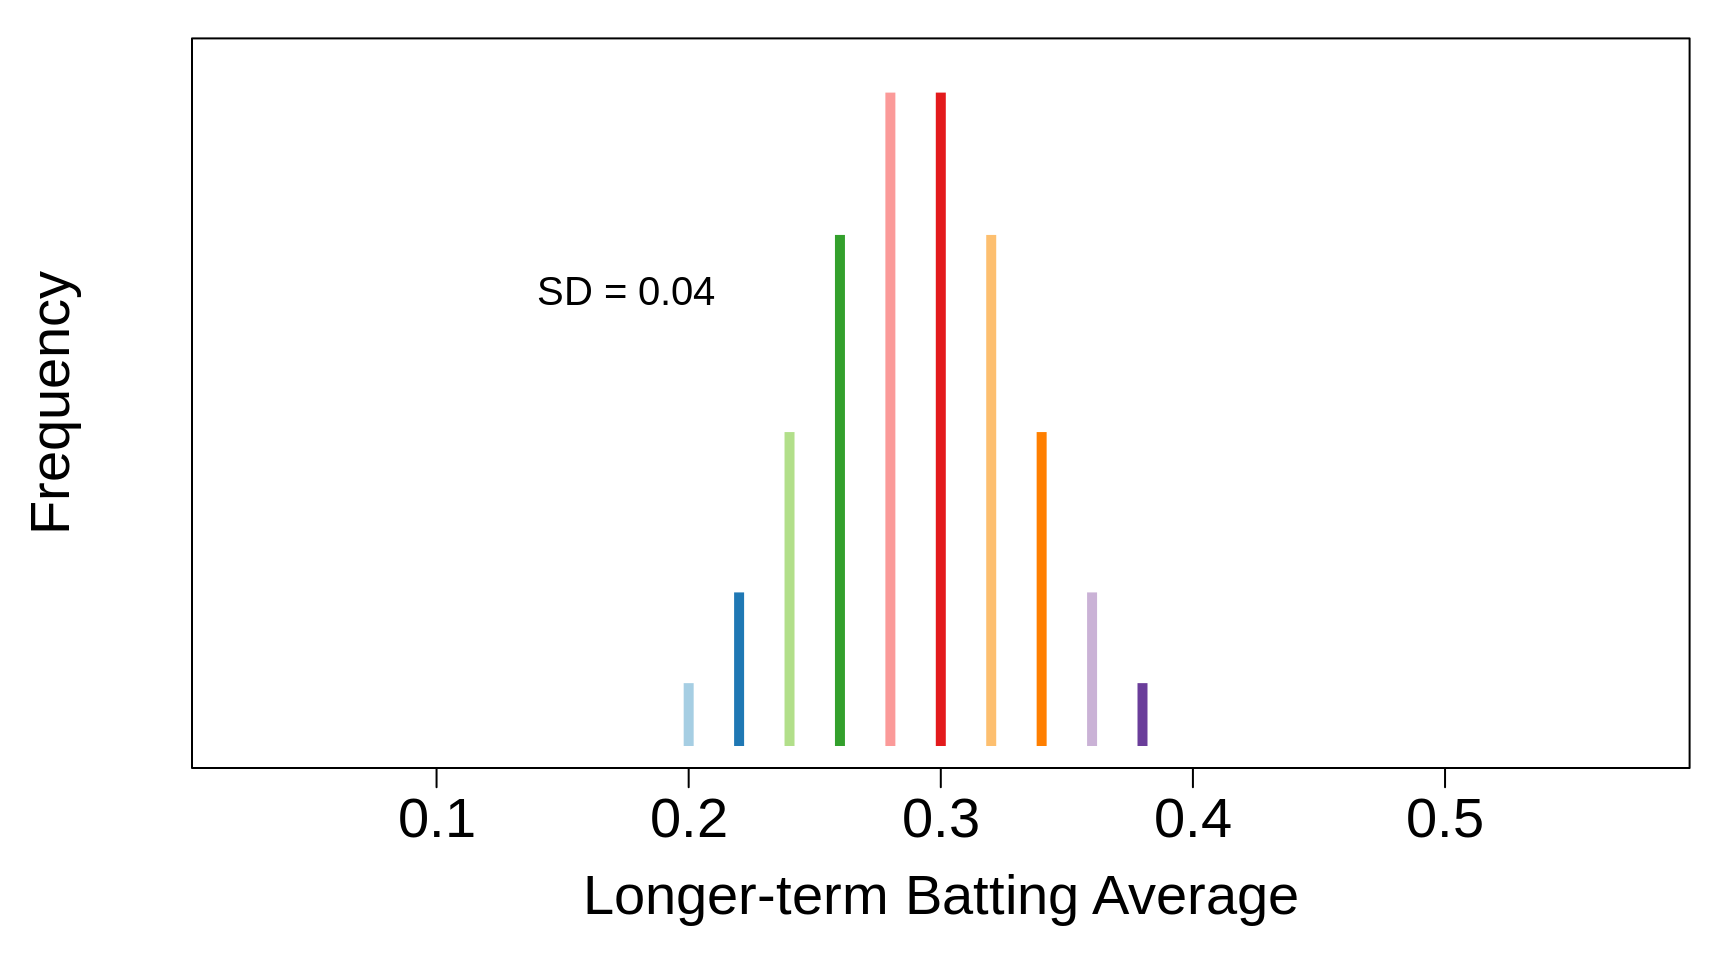 Simplified Distribution, **for learning purposes**, of Long-term Batting averages of Major League baseball players. Mean = 0.290; SD = 0.040.